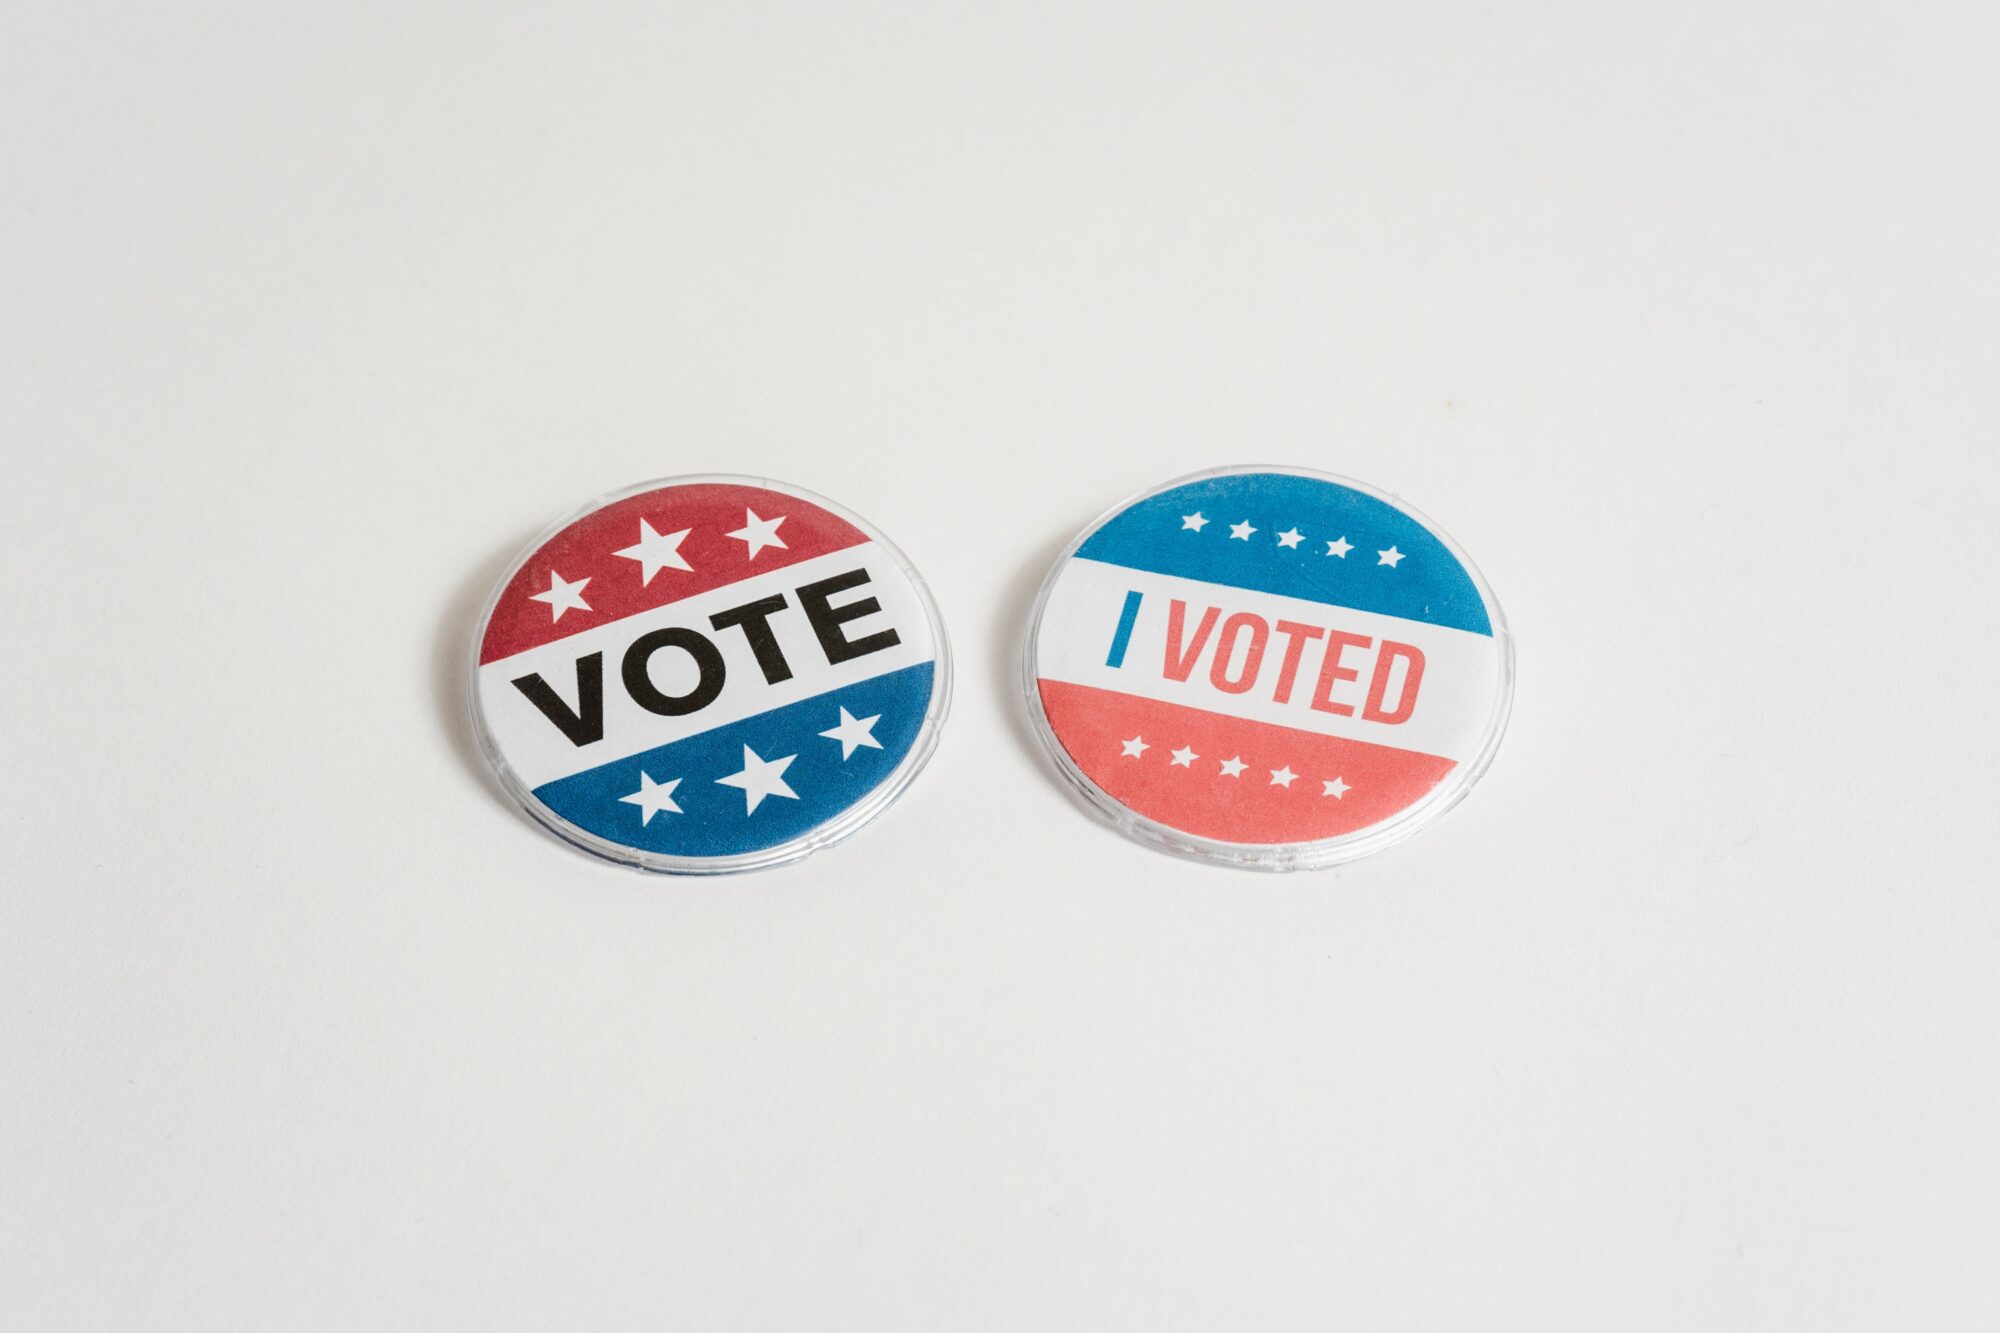 Vote and I Voted&quot; button pins on white background.